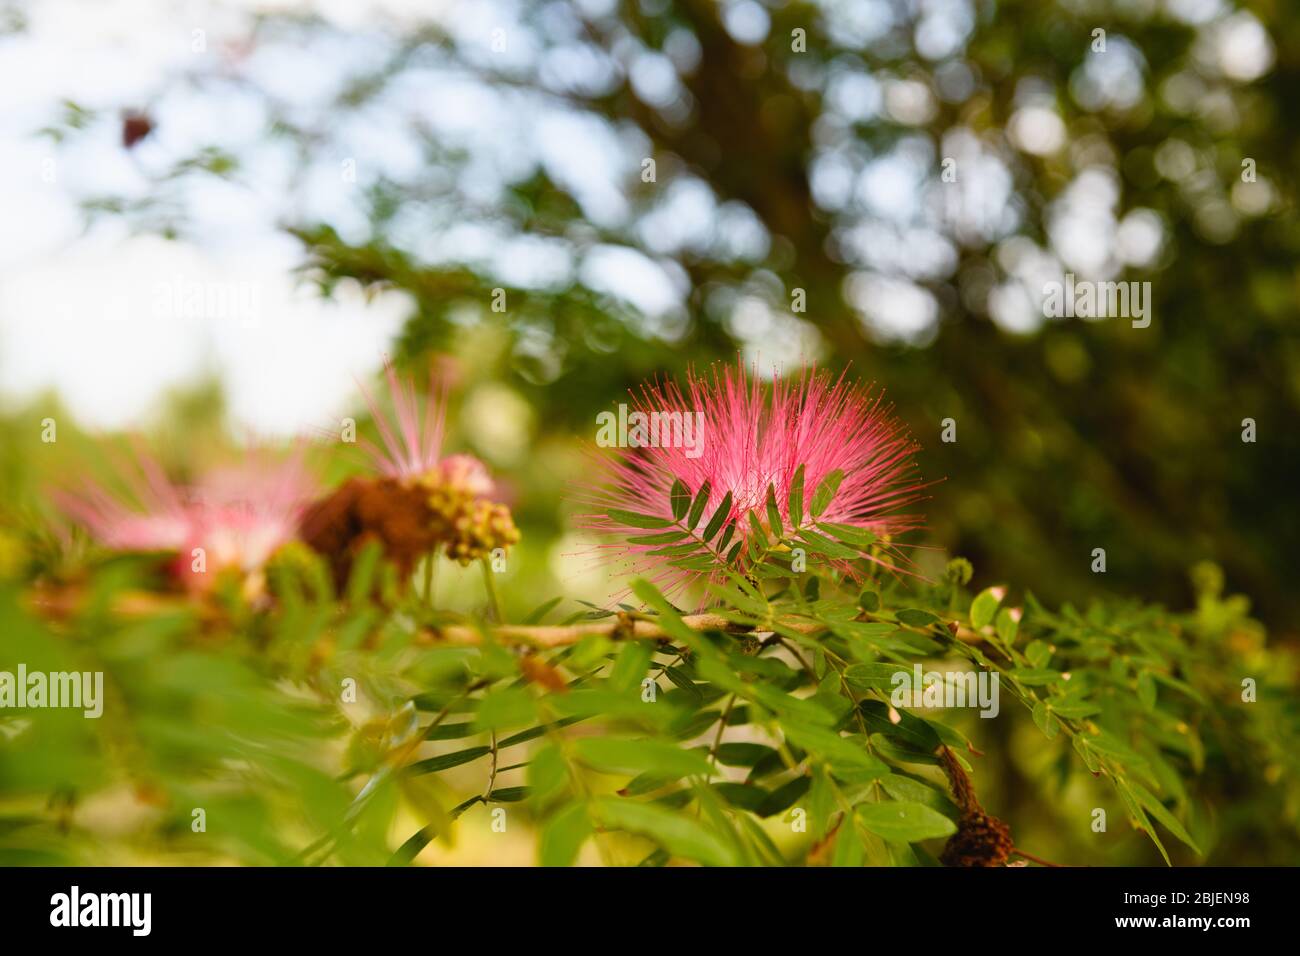 Albizia pink silk tree with fluffy pink flower blossom in sun light close up, exotic floral background Stock Photo